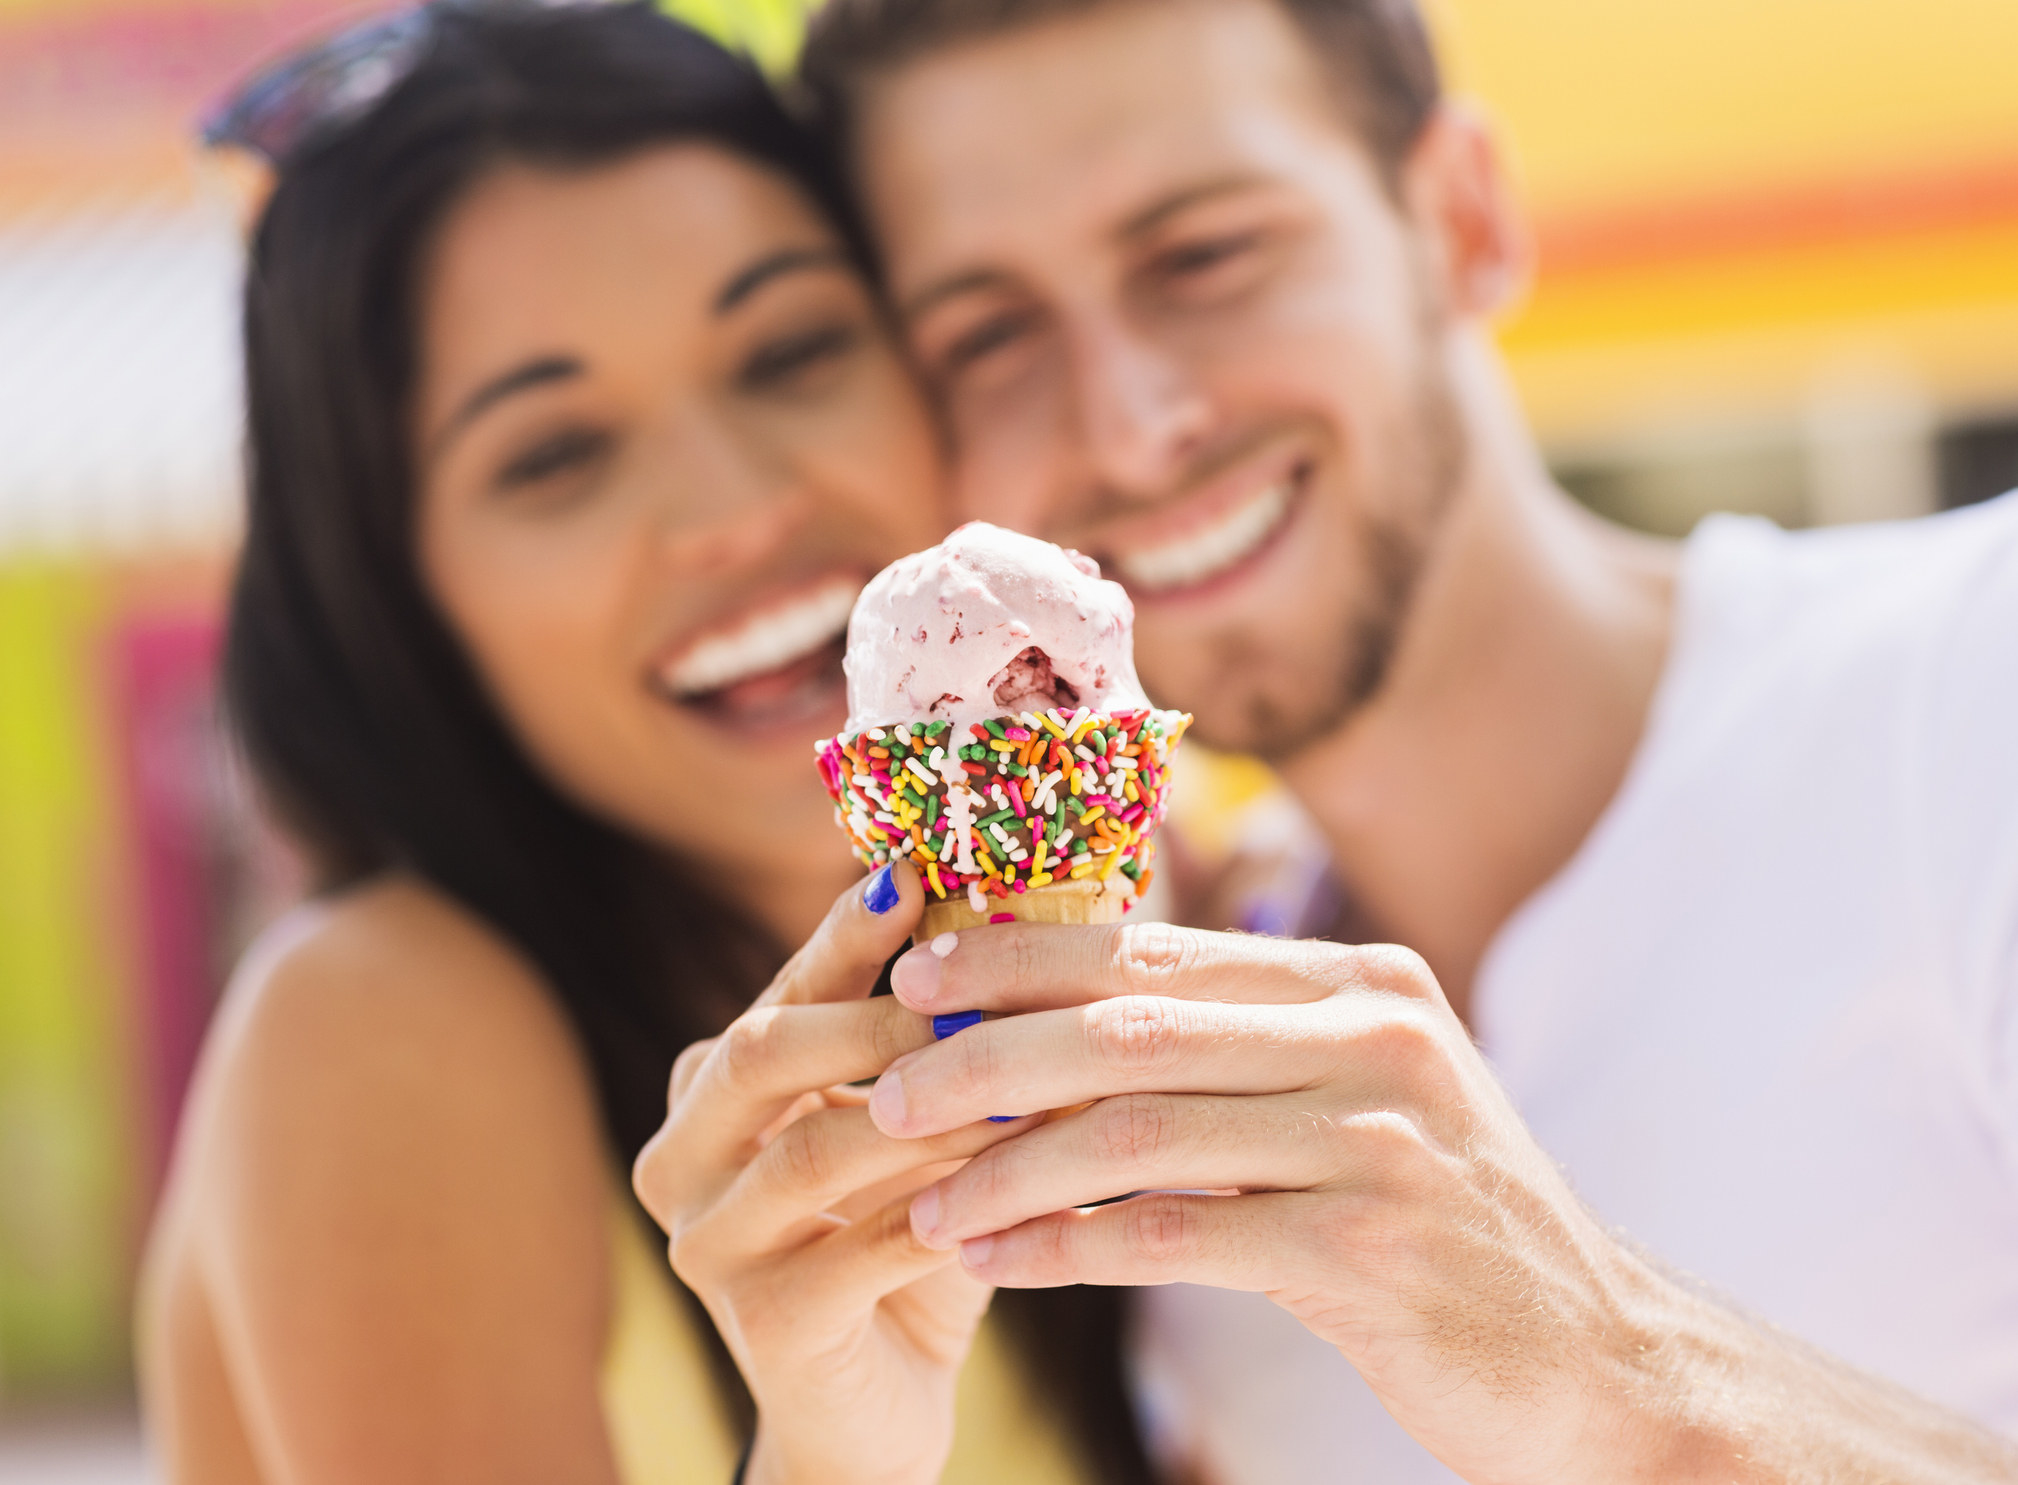 A couple holds a dripping ice cream cone they&#x27;re sharing close to the camera